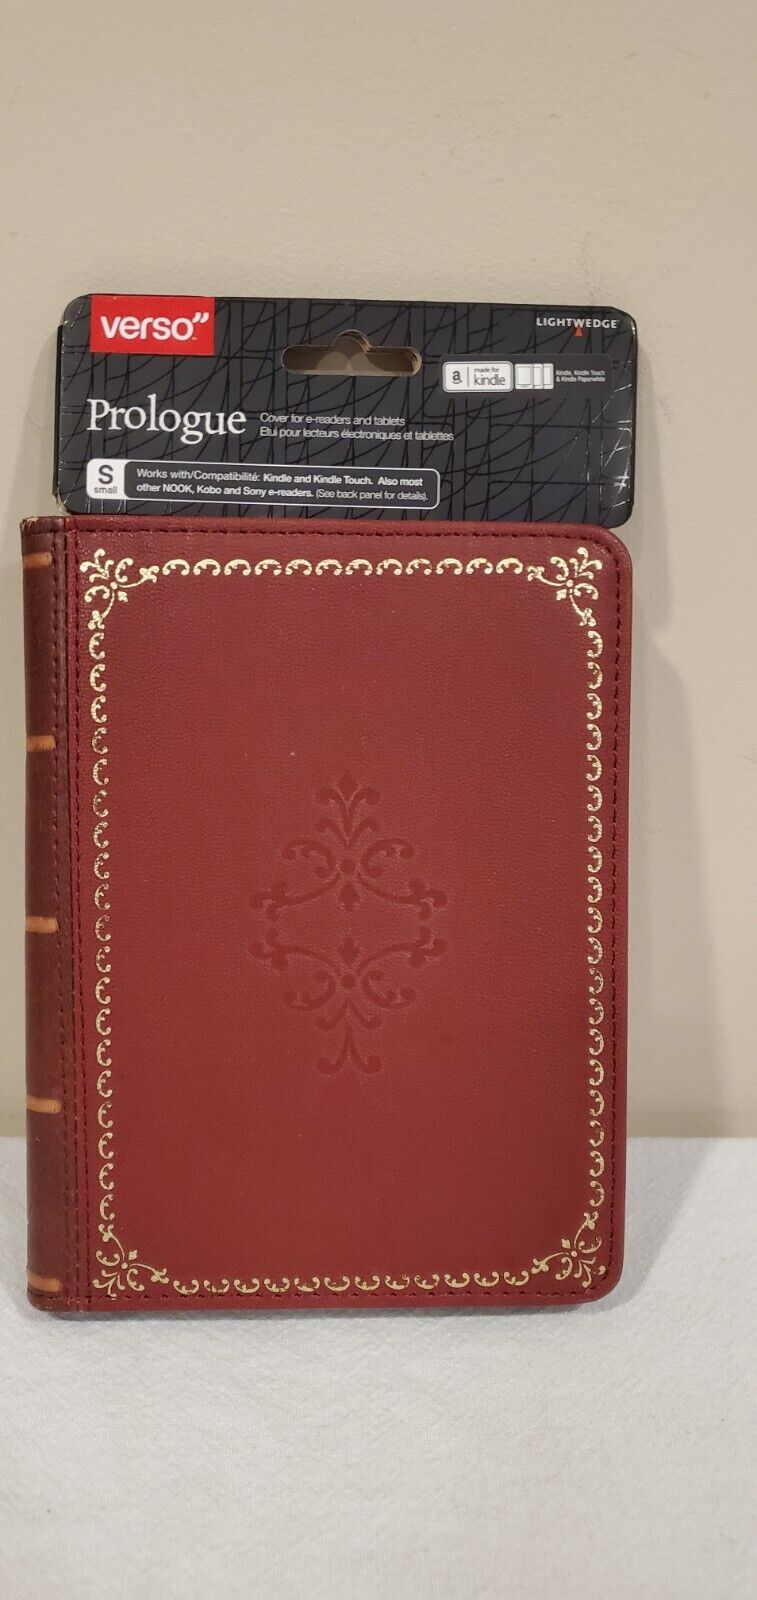 Verso Prologue Vintage Leather Book Cover for 6 inch tablet NEW